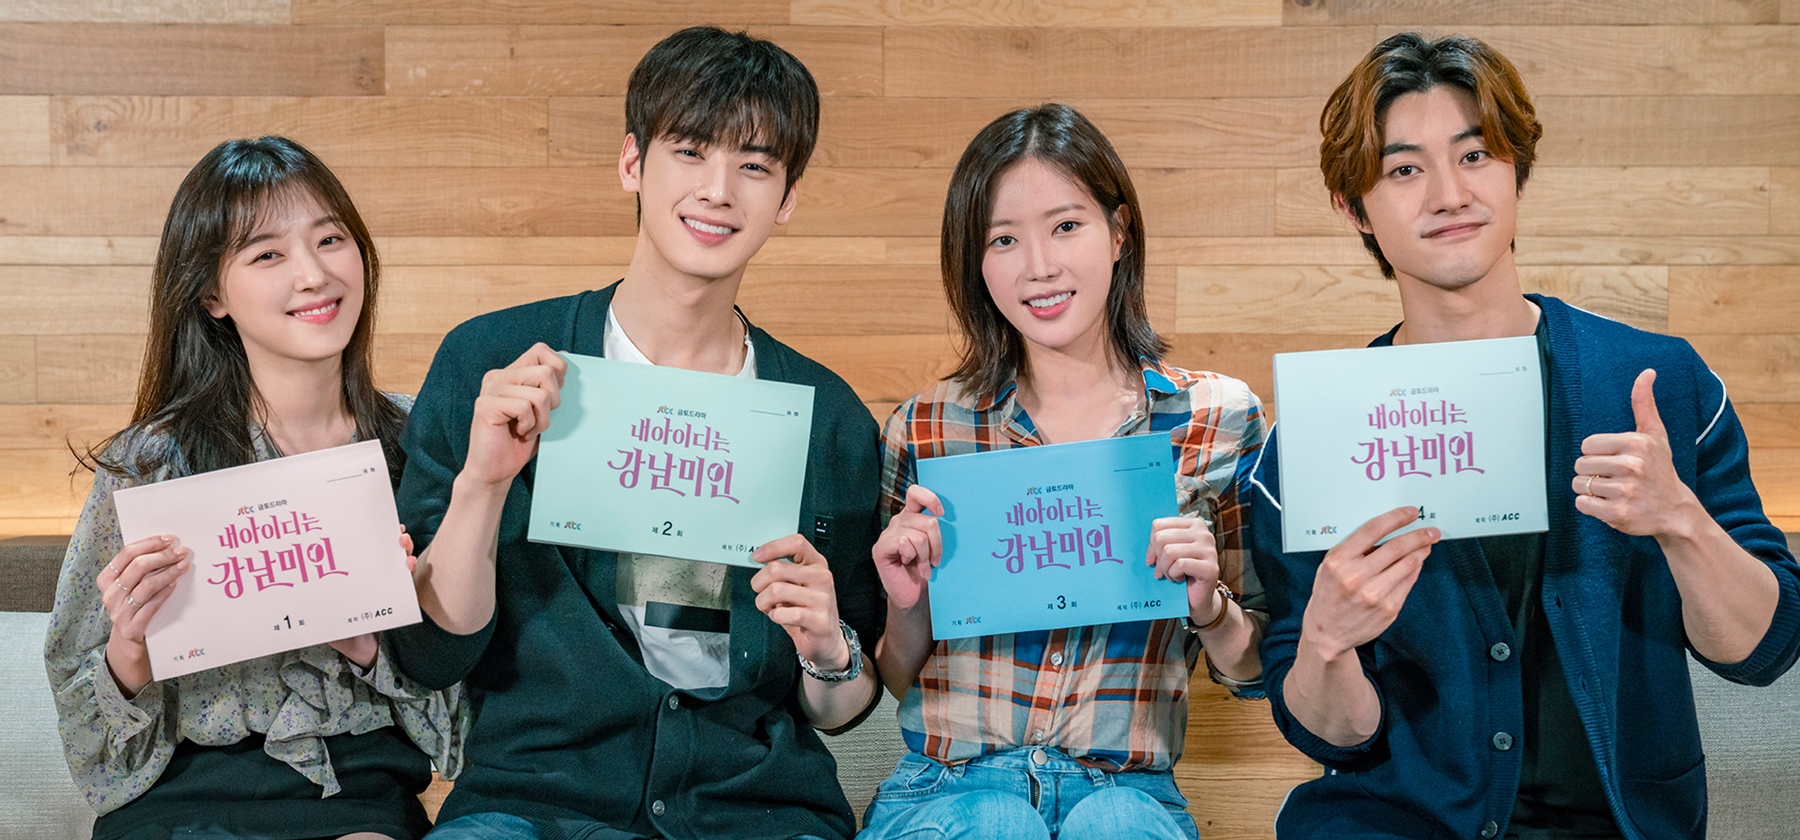 <p>In July 2018, nine KBS Drama Specials are on standby for broadcasting. KBS Drama Special unwilling to combine for the relay of 2018 Russian World Cup joined, and nine KBS Drama Special played against each other once in July. KBS Drama Special, heavily armed with new faces and new materials, as well as the best topical work in the second half who has all the expectations as a single person, is waiting to be formed one after another in July. While watching the kind of KBS Drama Special and forecasting that more happy troubles of viewers will be increased, I will introduce 9 KBS Drama Special now preparing for the squeeze.</p><p>- KBS 2TV Your home helper on July 4 First broadcasting: Perfect mans house helper Kim Ji-wun (Ha Seok-jin) is a womans life and a complex life that was ruined in his / her head Life Healing Kobe Drama Special # Weputun Original While KBS Drama Special has been successful with success in recent years, Your Home Helper that originated from Weeptun also presented a challenge It was. The production team revealed that KBS Drama Special will concentrate more on the relationships and troubles between these two, unlike the original being composed of episode form in which more than one person requests housework at Kim Ji-eun, I foretelled KBS Drama Special which was further upgraded than the original.</p><p># Healing Your home helper expects a warm healing KBS Drama Special, with a complete house helper living, as well as a complex blank clearance to the heart. Five teen young people who live their lives Lee Ji Hoon - Gowon Hui - John Sejin - with Una and House Helper Ha · Sookjin will make breathing, what will happen, what is happening in the everyday life of a quirky material Healthy KBS Drama Special has raised a lot of interest.</p><p>- tvN Mr. Sunshine July 7 First broadcasting: Shi Yuan (1871), and a boat aboard a warship, the boy who fell to the United States to Korea, the country where he abandoned himself with the status of an American soldier KBS Drama Special # depicting returning and spreading KBS Drama Special # Youngbok director and Kim Eun Suk writer again made a great success with successive line-up descendants of the sun, demon successively. KBS Drama Special attracted a lot of attention only by encounters of entertainment but KBS Drama Special attended famous actors who criticized only names such as Lee Byung Hun, Gim Teri, Yoo Young Suk, Kim Min Jong Jung, . It is already hot expectation as to what kind of synergistic effect the lineup of Mr. Sunshine boasts of a powerful force so that even discussions turn into topicality.</p><p># Chronological production cost As well as a glamorous lineup, the production scale is exceptional. In order to express the 1900s which had never been dealt with before, it was not easy to select places from costumes, to make sets. In particular, the story behind the fact that the Mr. Sunshine team, which started photographing in September 2017 and continues shooting until now, has been devoting its full effort to investing production cost of about 40 billion won.</p><p>- tvN formula Charles Louis 3: Begins July 16 First broadcast: 34, old slum died in former Britain (Yun Doo-Jun) Reunion with Iji (Baek Jin Hee) together with the start of this formula shanim Sharing the memories and memories at the age of twenty years, the power of the story # series to overcome the wounds The series let s let Charles which had been broadcasting the season 1 of 2013 has already reached the third series. Dragging a new material named Food KBS Drama Special Sharu Let has received popularity throughout the season for food stimulating daily empathy and salivary glands. Assistant cast Yunduejun will join us this season and we will also demonstrate the power of the powerful season KBS Drama Special with a story added to the summer season feeling that follows winter - spring.</p><p>#Food Food was popular during the epidemic was born Charles Louis Charles seems to continue to power the popularity of Food as ever. Even though many hours have passed since 2013, while various programs of cooking are still receiving the viewers love, I am looking forward to seeing the familiar, familiar dishes melted out during the development of KBS Drama Special What we added was Initial Character Formulas was launched. In the summer that is easy to lose appetite, drooling already turns out what kind of different taste it offers again.</p><p>- JTBC Life July 23rd broadcasting: If the belief of those who try to change and those who try to protect, like the intense antigens and antibodies reactions occurring in our bodies are hospitals, among the group images Colliding medical KBS Drama Special # Soo Yeon Lee The birth of Satan Soo Yeon Lee writer is a KBS Drama Special monster freshman who appeared like a comet in the Secret Forest in 2017. In order to raise the association, I only refrain from the second work now, but it is difficult to see well at KBS Drama Special Joo Seung-woo and Yejeumyeon, Yeh-hyun who left intense impression in the previous work, and once, Soo Yeon Lee will be appearing in the work of the writer, is drawing extraordinary interest. Here we are added up to the joining of actors of various colors such as Lee Dong Wook, Wanjina, Moon So Ri, Moon Sung Geun and Jung Ho Jin, and we are expecting the birth of a new division.</p><p># Medical KBS Drama Special Factual Medicine KBS Drama Special is a genre that was used rather than KBS Drama Special to feel that there is nothing new. However, Soo Yeon Lee writer is the owner of appealing power that tightly fills the density of secret forest tight with his own thought that there is a general court KBS Drama Special in the previous work. For that reason, we are more concerned about how the duck medicine water is reproduced by hand of Soo Yeon Lee writer as much as the court water.</p><p>- SBS Dear Judge Master July 25 First broadcast: Before the missing type, the former five offenders Han Genghuang (Yun Shiyung) will become a judge and stand in court. Beginning a painful judgment based on actual war law Unjustifiable judge Growth period # 1 person 2 roles are the most noteworthy parts of KBS Drama Special transform into Yun Shi Yuns two roles It is. Recently Yoon Shiun, who is showing literally strings, plays Hankanho, a 5-year-old criminal, and Hansho, a senior judge, at the same time through Dear judge. The success of bad brother who became a dear judge on behalf of the disappeared type comes closer by way of color.</p><p>Judge Recently courtroom In the flood of water, the newly drawn occupation is just a judge. Meanwhile, the story that was focused on lawyers, inspections, etc, was transferred to the judge. Following Sumitomo, expectations are rising for the judge-centered statutory KBS Drama Special that SBS again issues.</p><p>Four of the nine KBS Drama Special have not yet confirmed the broadcast, and the official poster has not been released. As a result of frequent absence and combination change due to 2018 Russian World Cup relaying, we will meet the four KBS Drama Special which we are forecasting broadcasting in July.</p><p>- MBC Death Race Decision Romance, the first broadcast in July: Hormone obsession female endocrine physician host a (Lee Se-young) steaming the subject of research as an incarnation neurosurgeon Han Seung-joo Hormone Intensive Inquiry Romance KBS Drama Special # Hormone Death Race Decision Romance triggers something worrisome by placing the unique material Hormone in its entirety. At first glance the doctor may be misunderstood by the heros medicine KBS Drama Special, but Hormone is edited as mediation and declared differentiation by the romance of a girl doctor.</p><p># Romance veteran KBS team leading the Krum Drama Special is also very hard. Romance is necessary season 1 Candidate Romance Mr. Lee Chan-han who opened up a new chapter of KBS Drama Special and Mr. Gim Nam Hui writers melted college student romance through cheese in the trap. Also, actors Ji Hyun Woo and Lee Shi-young, who have inner faces that freely travels freely and seriously in love affair, is going to boast of compatible breathing.</p><p>- JTBC My name is Jiangnan Beautiful, the first broadcast in July: Since the childhood I was told a joke that I can not do, so the future of women (Im Sui Town) who thought that I would get a new life by plastic surgery I am experiencing a different campus life from those I have dreamed of after university entrance and looking for true beauty Unpredictable inner growth KBS Drama Special # Manchito Male / Female Virtual Casting Highest synchro rate It is the highest expectation point of Gangnam Bijin ID in the Im imitated in Chung - Wu who boasts. Im talking about the beauty of a beautiful girl born with the power of medicine, tell the message what is true beauty. In addition, he wearing the perfect clothes called face genius crown crying campus man-god, started to digest his first major work.</p><p># Campus romance Campus water that I visited for the first time in a long time is pleased. Recently the youth KBS Drama Special was manufactured a lot, but it is a fact that it was difficult to browse the campus water, which is the center of college students. Therefore the youth KBS Drama Special who was born when the background of the Weptton original and the campus was born but plays plumply has started to have the strength of contrasting with other KBS Drama Special broadcasted at similar times.</p><p>- SBS Thirteen and seventy seven first broadcasting in July: I woke up to 30 with falling into the tenth frame Mental Physical Inharmony Woman Disconnecting from the world with Wu Frog (Shinhwaeseon) The living Block man Ball Udine (Yansegyo), these thirty but seemingly comical comic Loco # crowds of choice thirty seventeenth gained a lot of attention from the casting stage It was. First starring titled Golden My Life got up at the public KBS Drama Special with a rating of 45%, and many interests were photographed for the next work Lee Todong Shin Hye Son threw an intention to participate in a romantic comedy. In addition, Yansejeon who confirmed the appearance with the opponent role has led Mellow KBS Drama Special The temperature of love to success with the performance power not suitable for the rookie. As described above, when two people who can be shinned in as a starter refrain from making a new leap, viewers expectations are further increased as they are carefully selected works.</p><p># 13 The material is not ordinary. Actually it is 30 years old, because the story of two people who have stopped for seventeen reasons for different reasons comes closer to freshness. As well as lively and vibrant atmosphere like student water, many adults in the whole country are attracting expectations as KBS Drama Special, which embraces sympathy and crushing of .</p><p>- MBC Time, first broadcasting in July: spending a finite time, decisive every minute to make every choice for everyone, spelling in the time passed away is the story of four men and women</p><p># Rising Star Time draws attention by embarking on an exceptionally attractive new actor exceptionally. Kim Jung Hyun, who showed amusing comic performance in the previous work, will show off his transformation taking on the role of a lustless chaebol II. Jang Jun-ho PD who directed Thief Dzukunim and Sohyeong who brought the second breath together again come back to the attractive chef wishes to visit Hemarium and sorrow. It is a part where people interested in the man who wants to return time and the two girls who encountered the trapped women in the past time.</p><p># Cheeho-chul writer who was made to receive attention at once in daily echoing secret is a well respected writer with fine writing force. There are many expectations gathered by Choi-chul writers who are solving the shaggy story with time, which is a routine but simple material. I expect to expect a dense KBS Drama Special like a one-line introduction feels somewhat philosophical.</p><p>iMBC Gimun Byul | Photo KBS Drama Special Official Poster and Official Website</p>